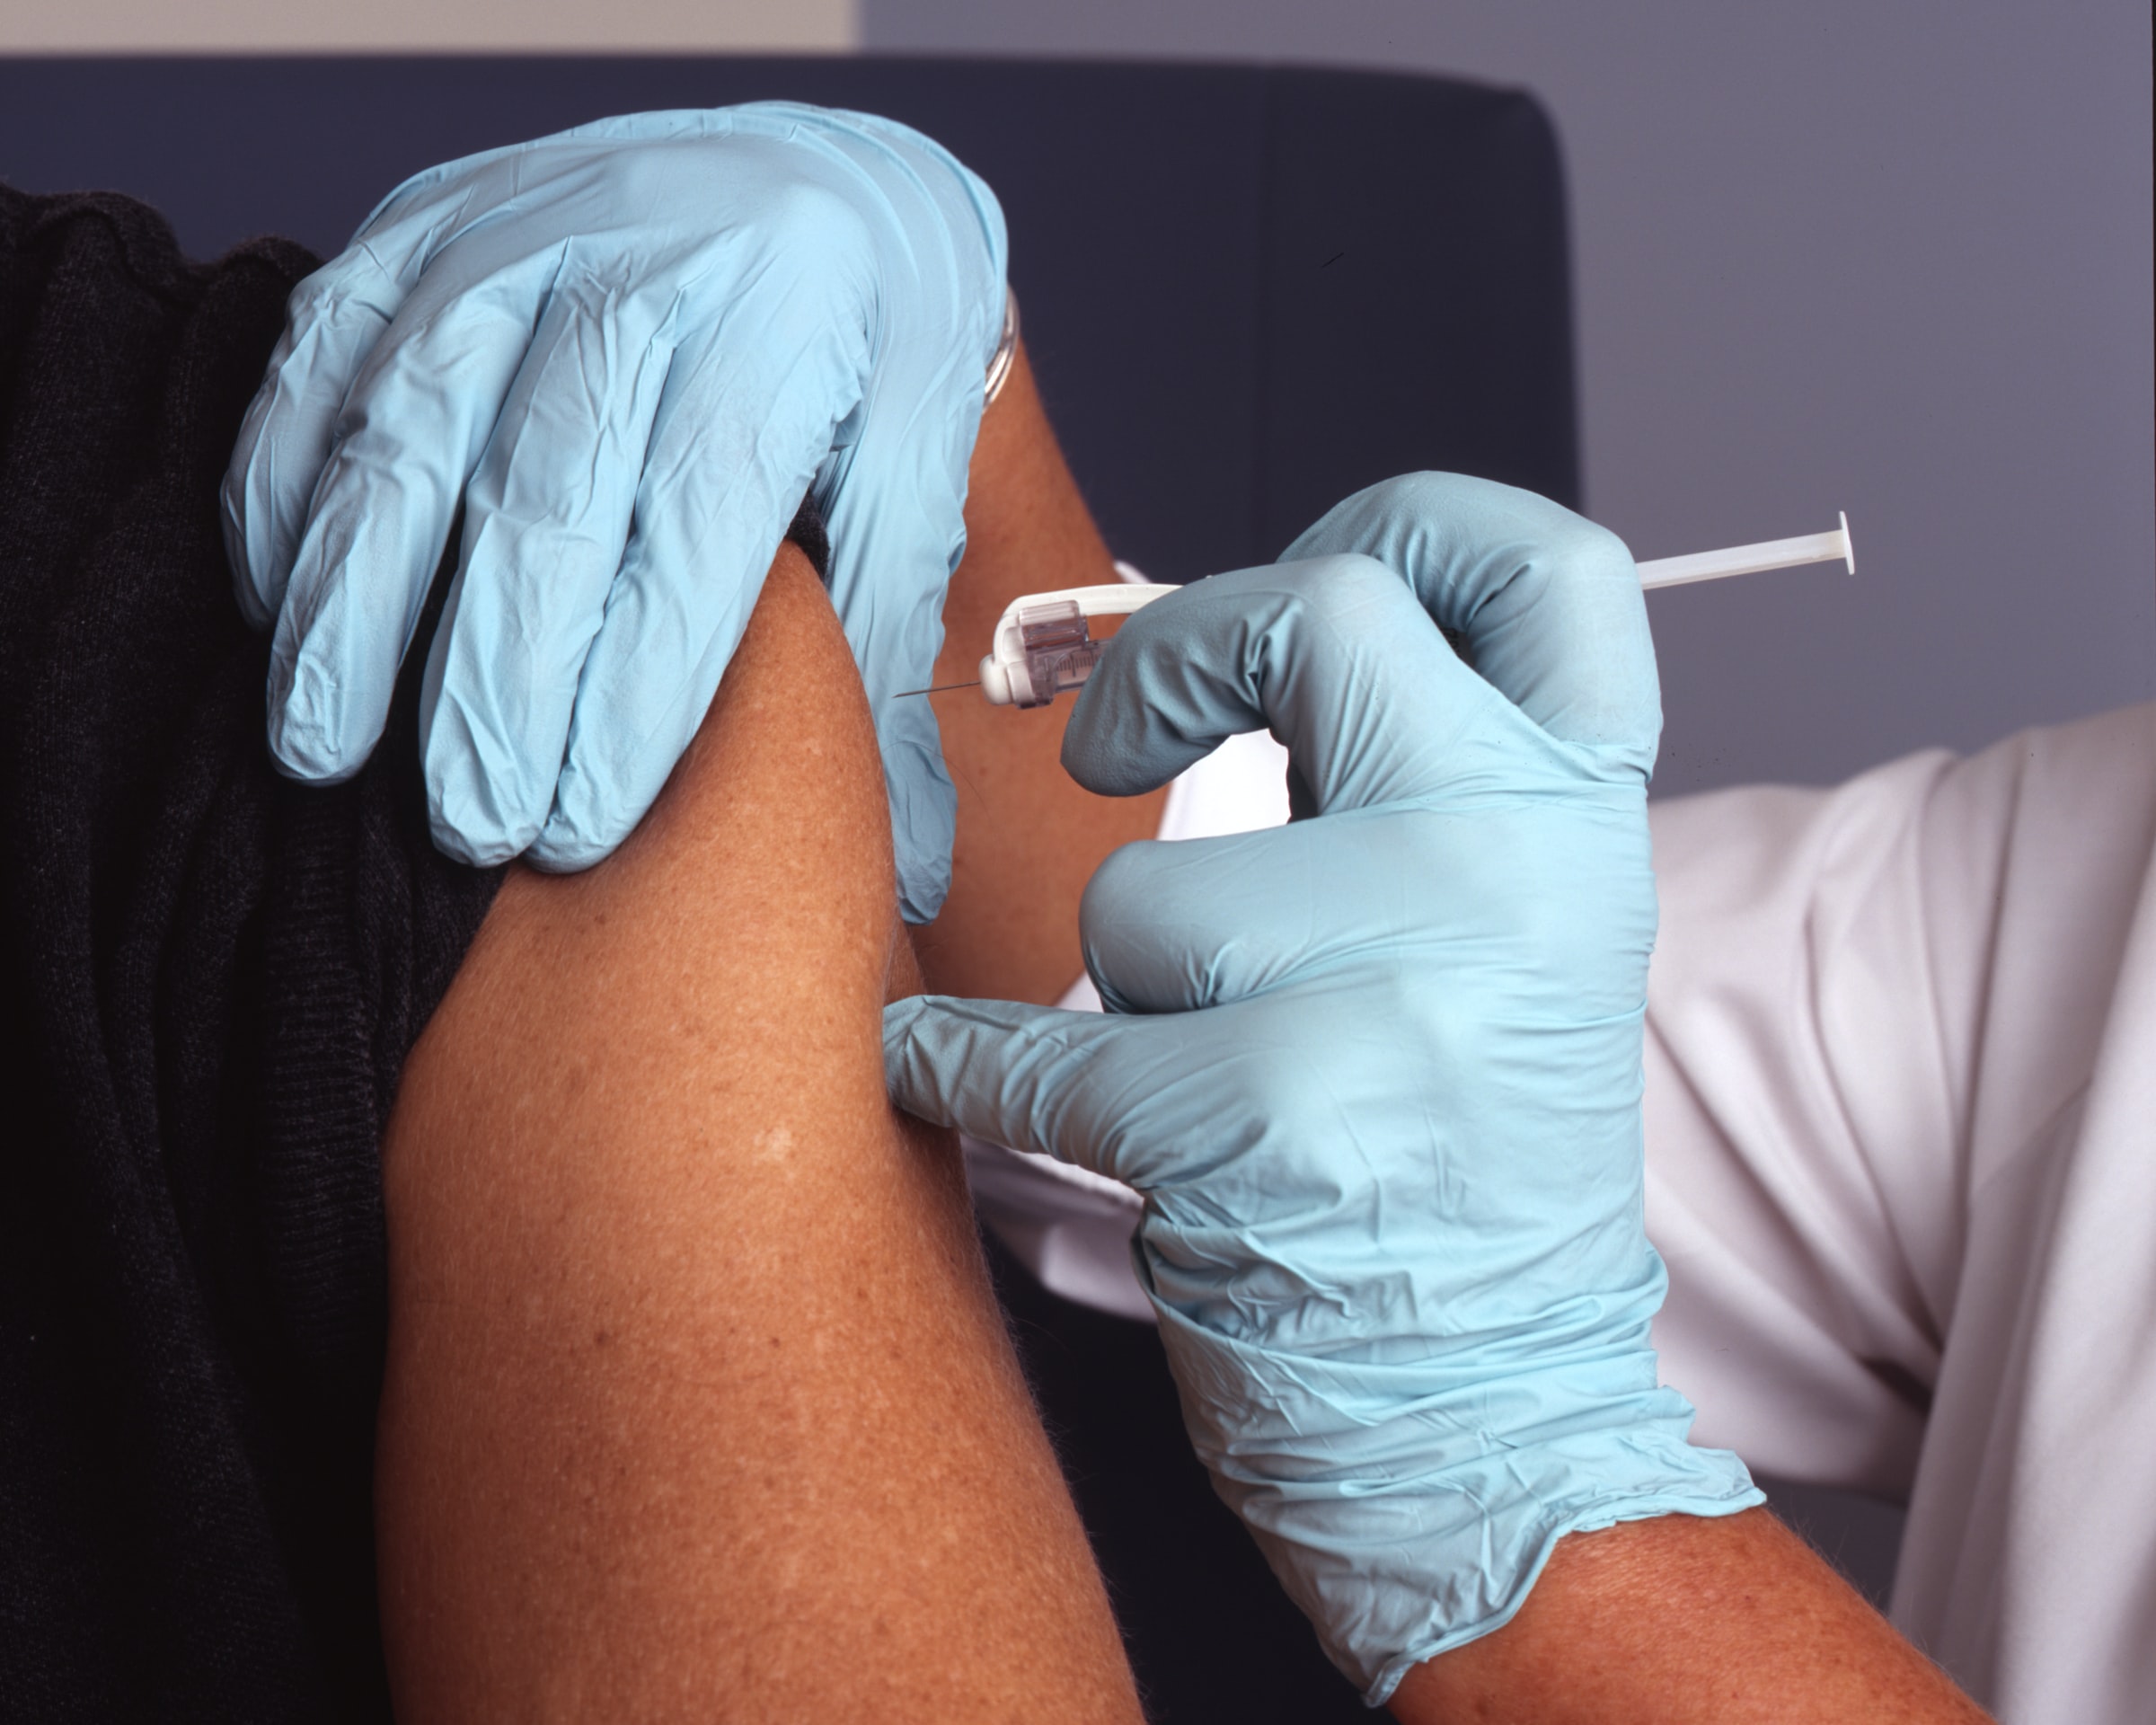 Pharmacy Deserts and the Race to get COVID-Vaccinated